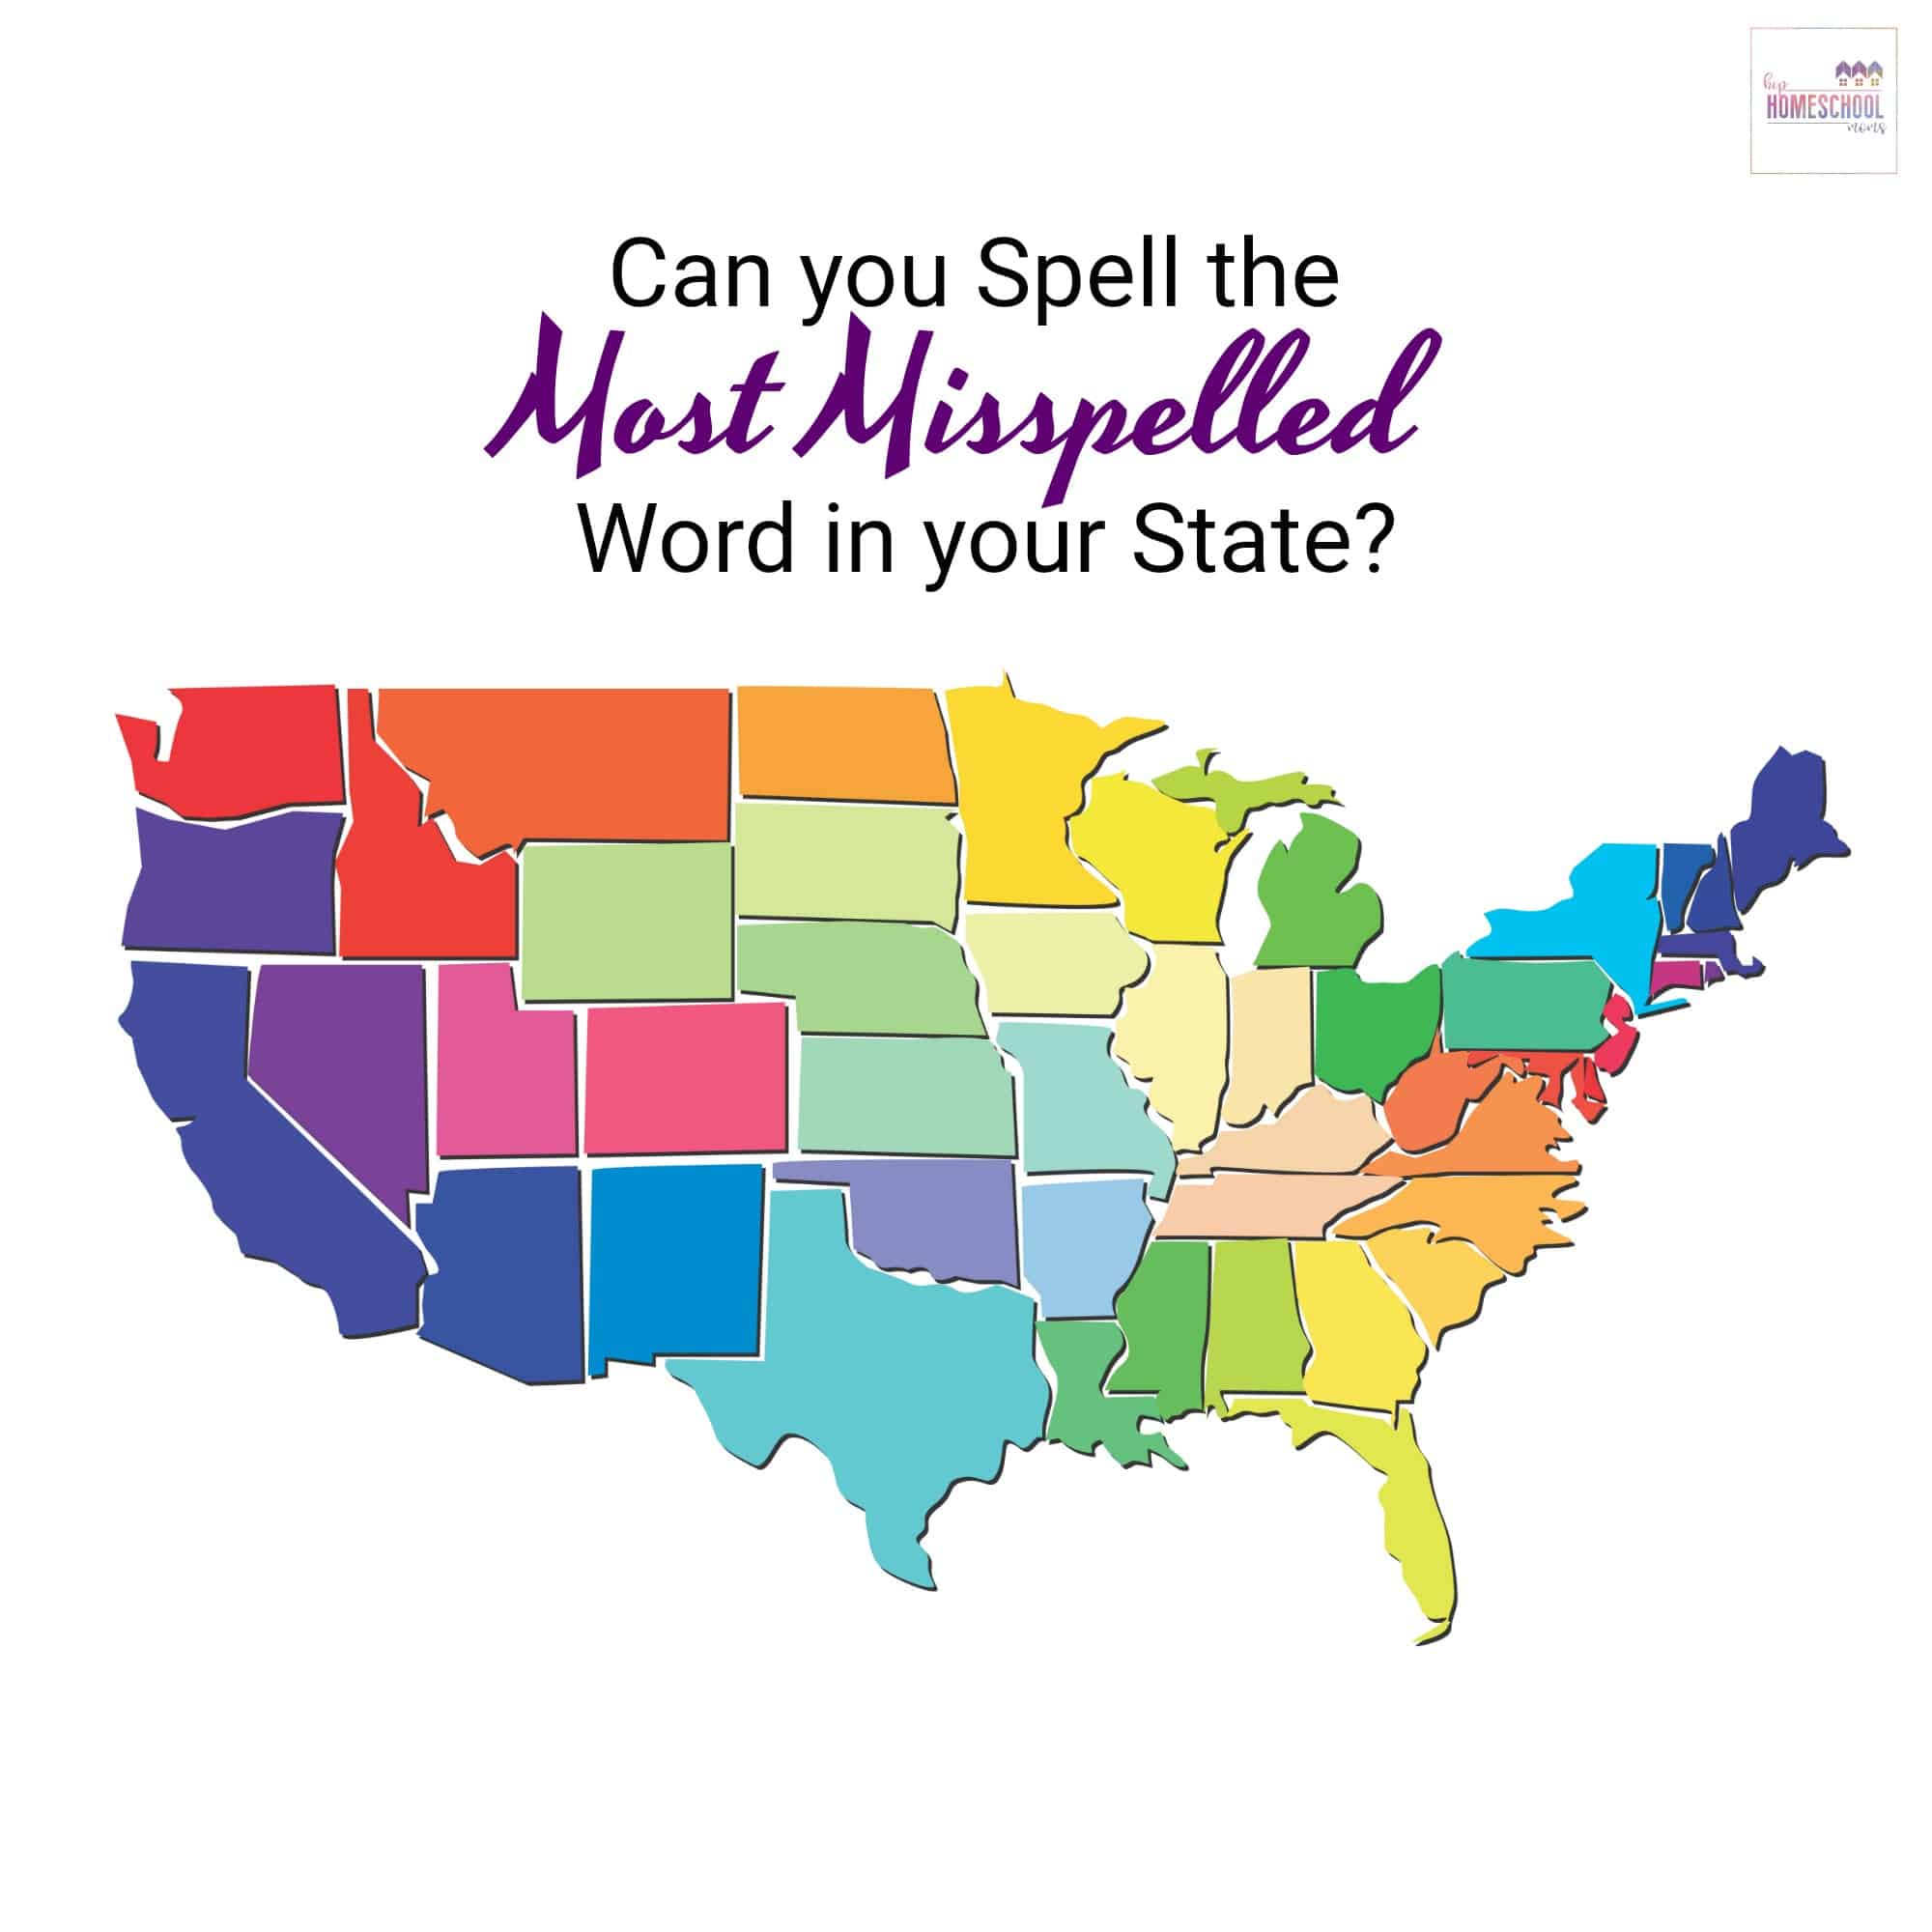 Can you Spell the Most Misspelled Word in Your State?